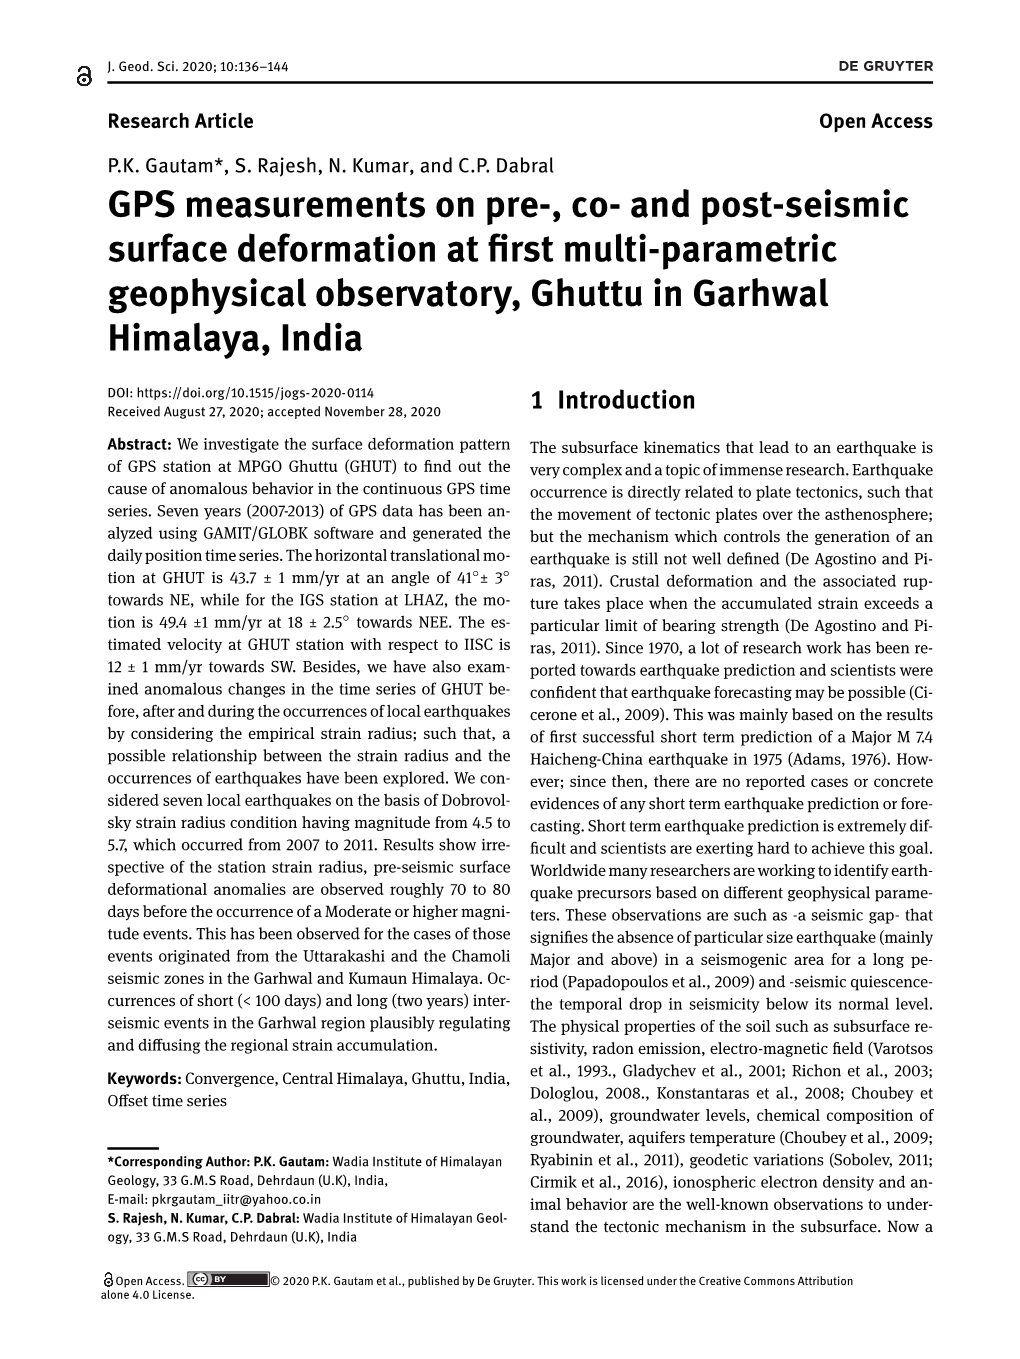 GPS Measurements on Pre-, Co- and Post-Seismic Surface Deformation at Rst Multi-Parametric Geophysical Observatory, Ghuttu in Garhwal Himalaya, India